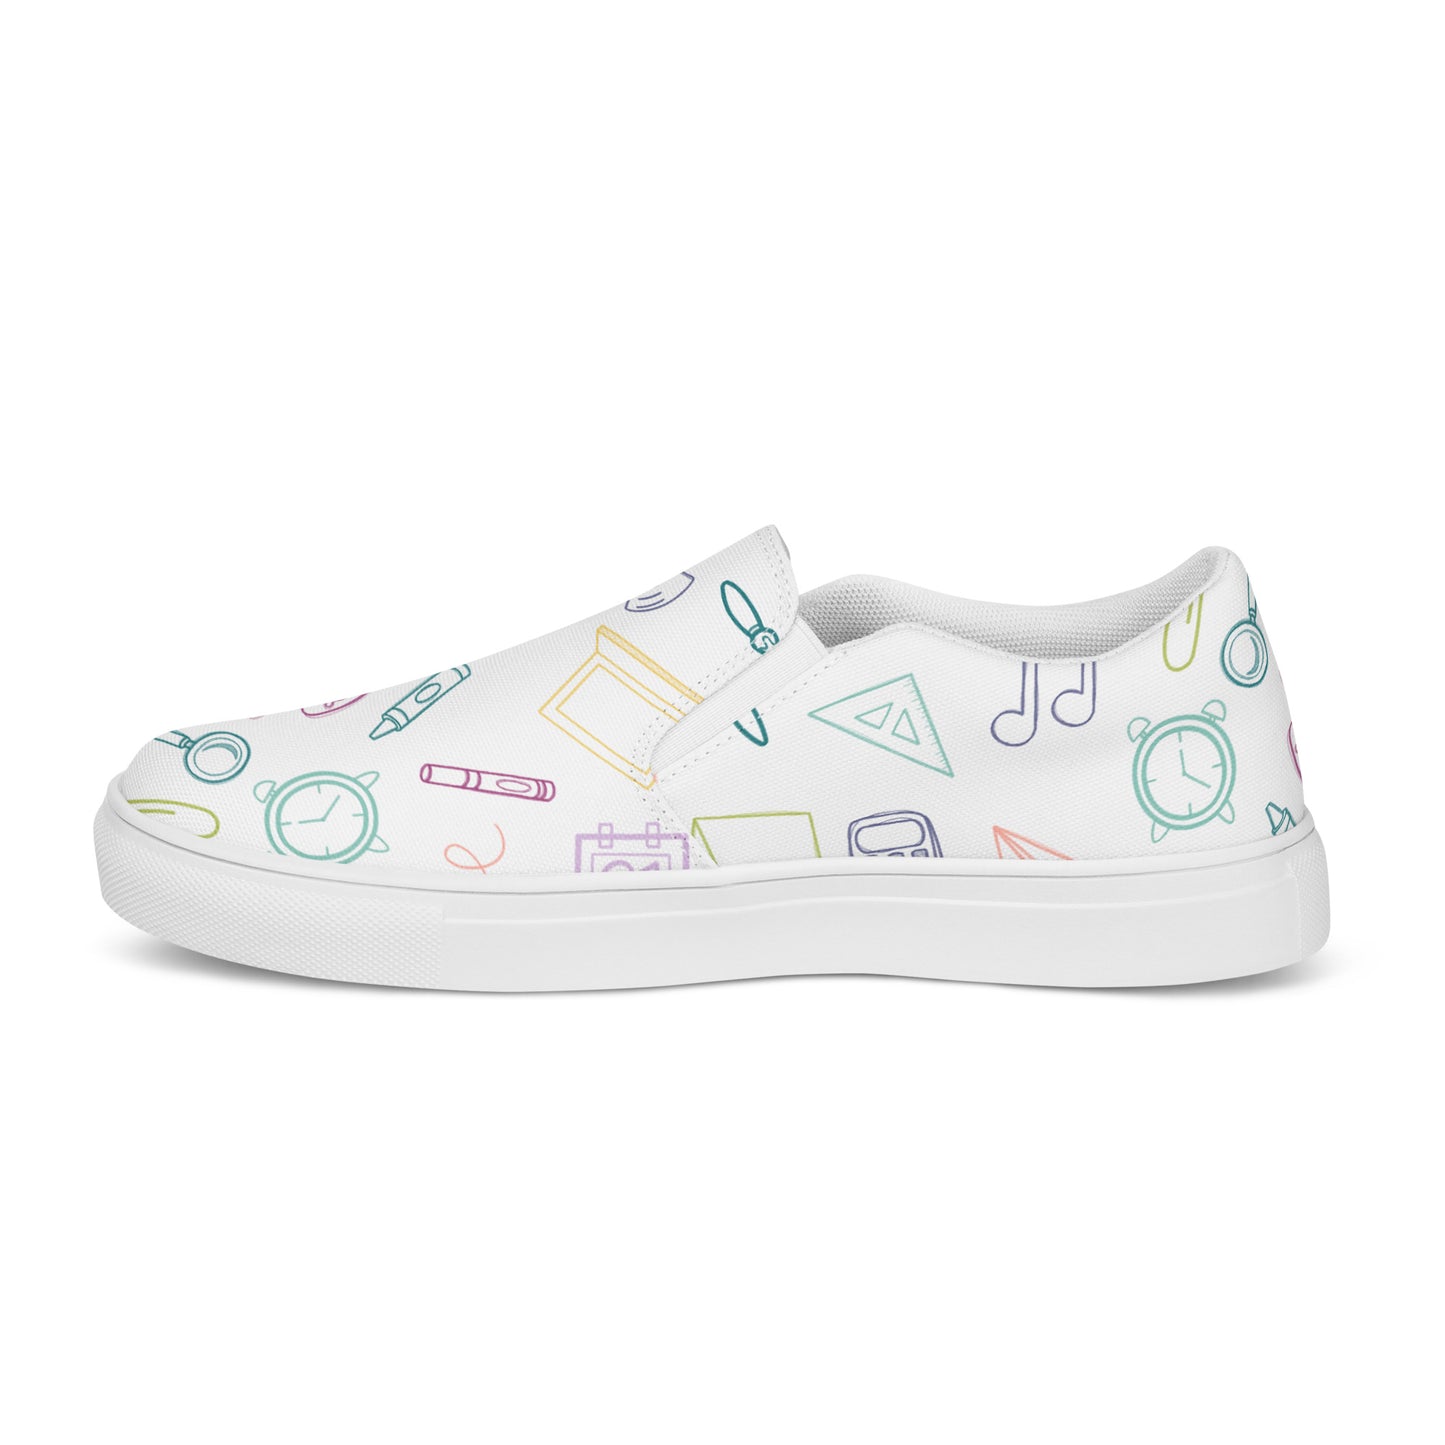 Muted Rainbow on White Elementary Doodles Slip-on Canvas Shoes (Women's Sizes)